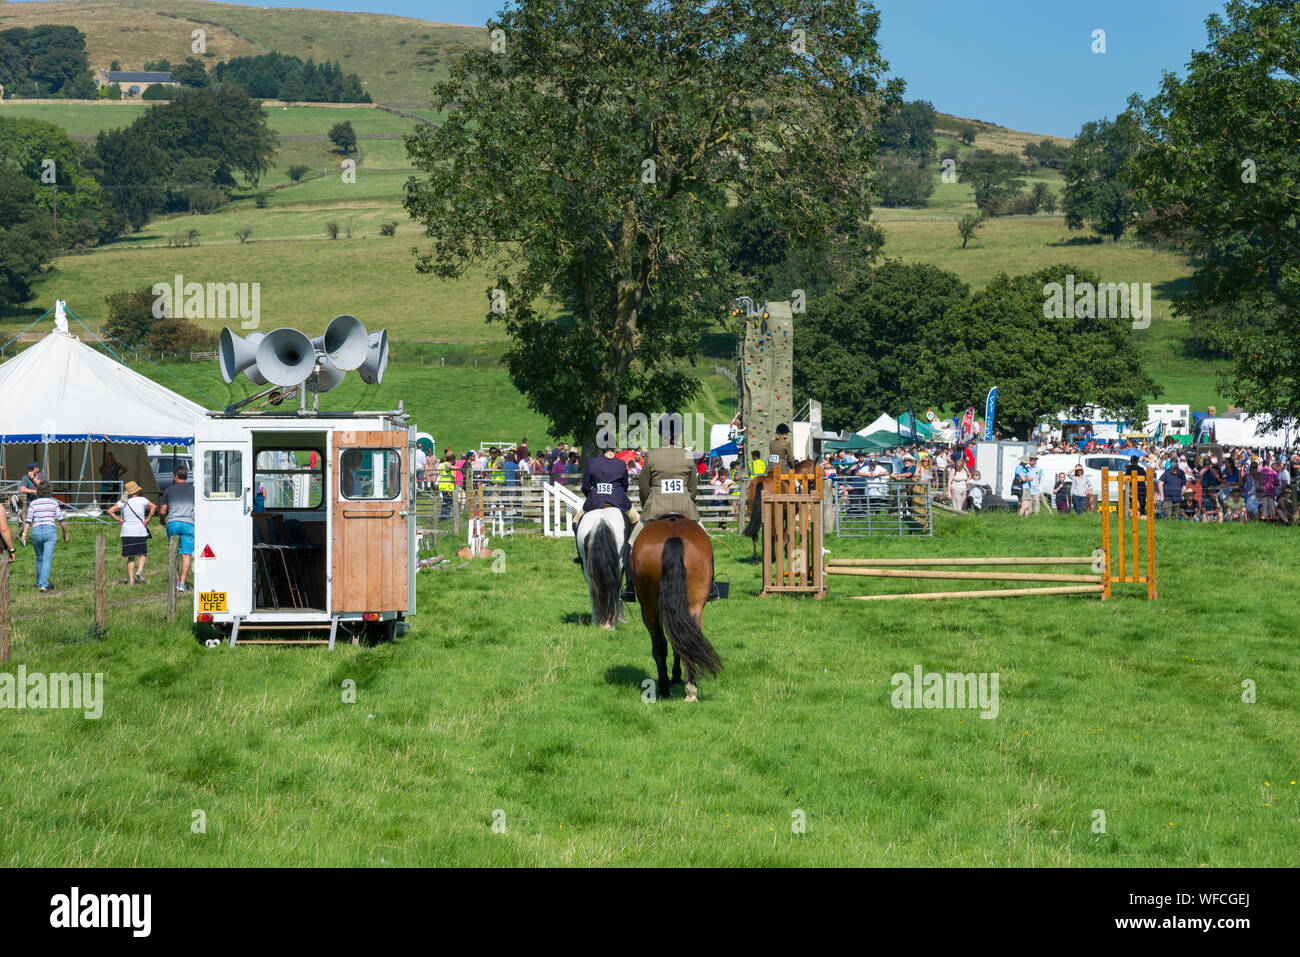 Hope Show on the August bank holiday 2019 in Derbyshire, England. Horses in the show ring. Stock Photo